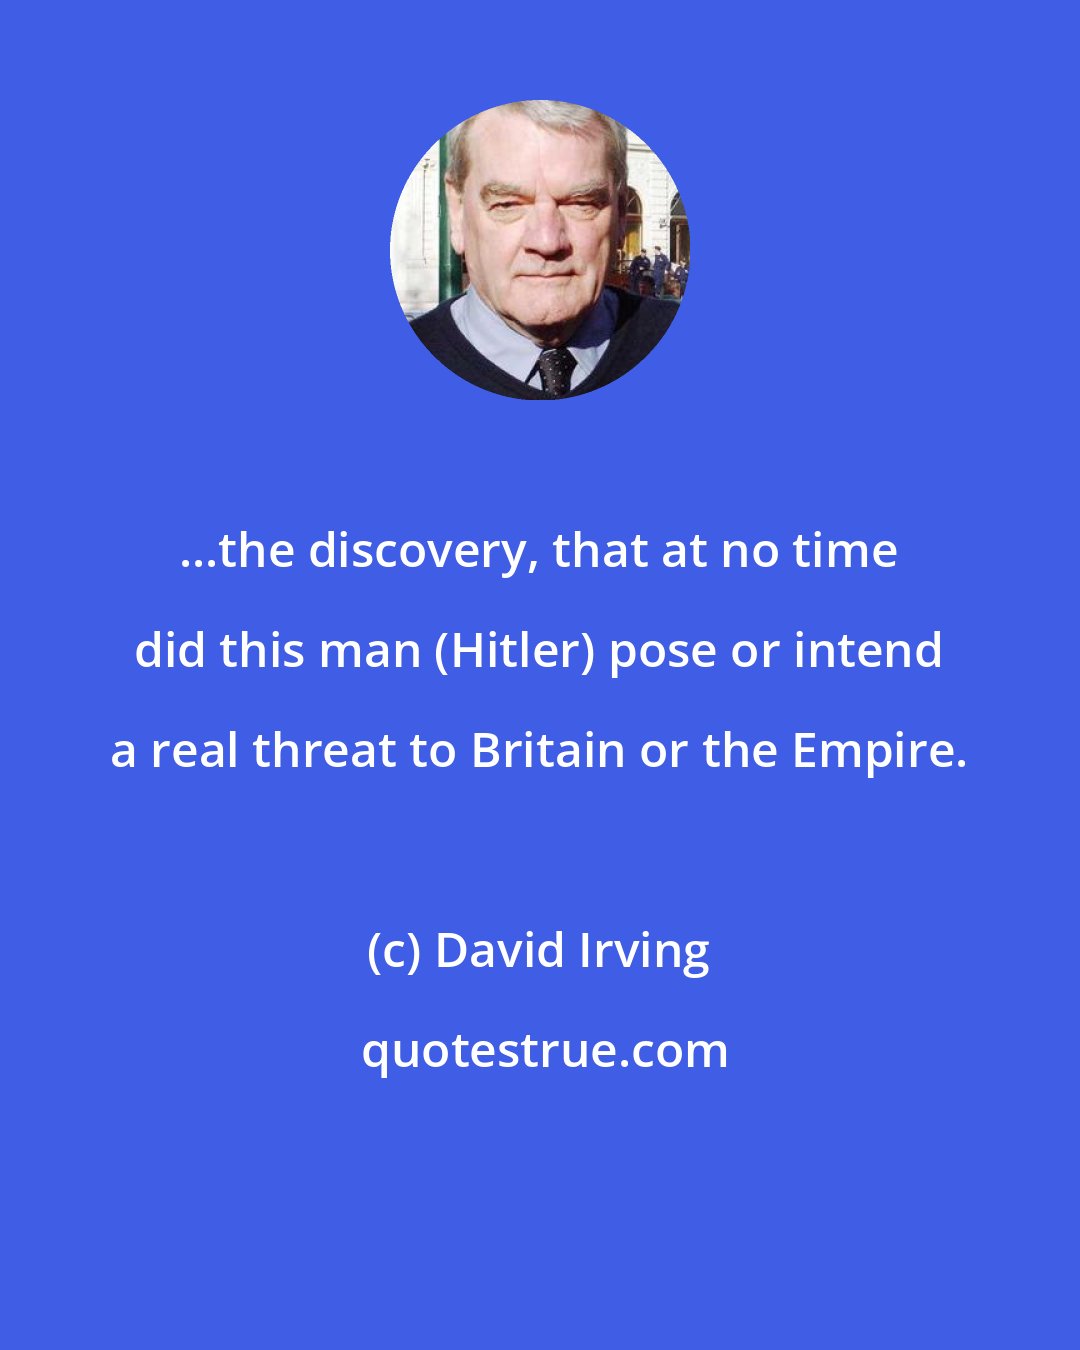 David Irving: ...the discovery, that at no time did this man (Hitler) pose or intend a real threat to Britain or the Empire.